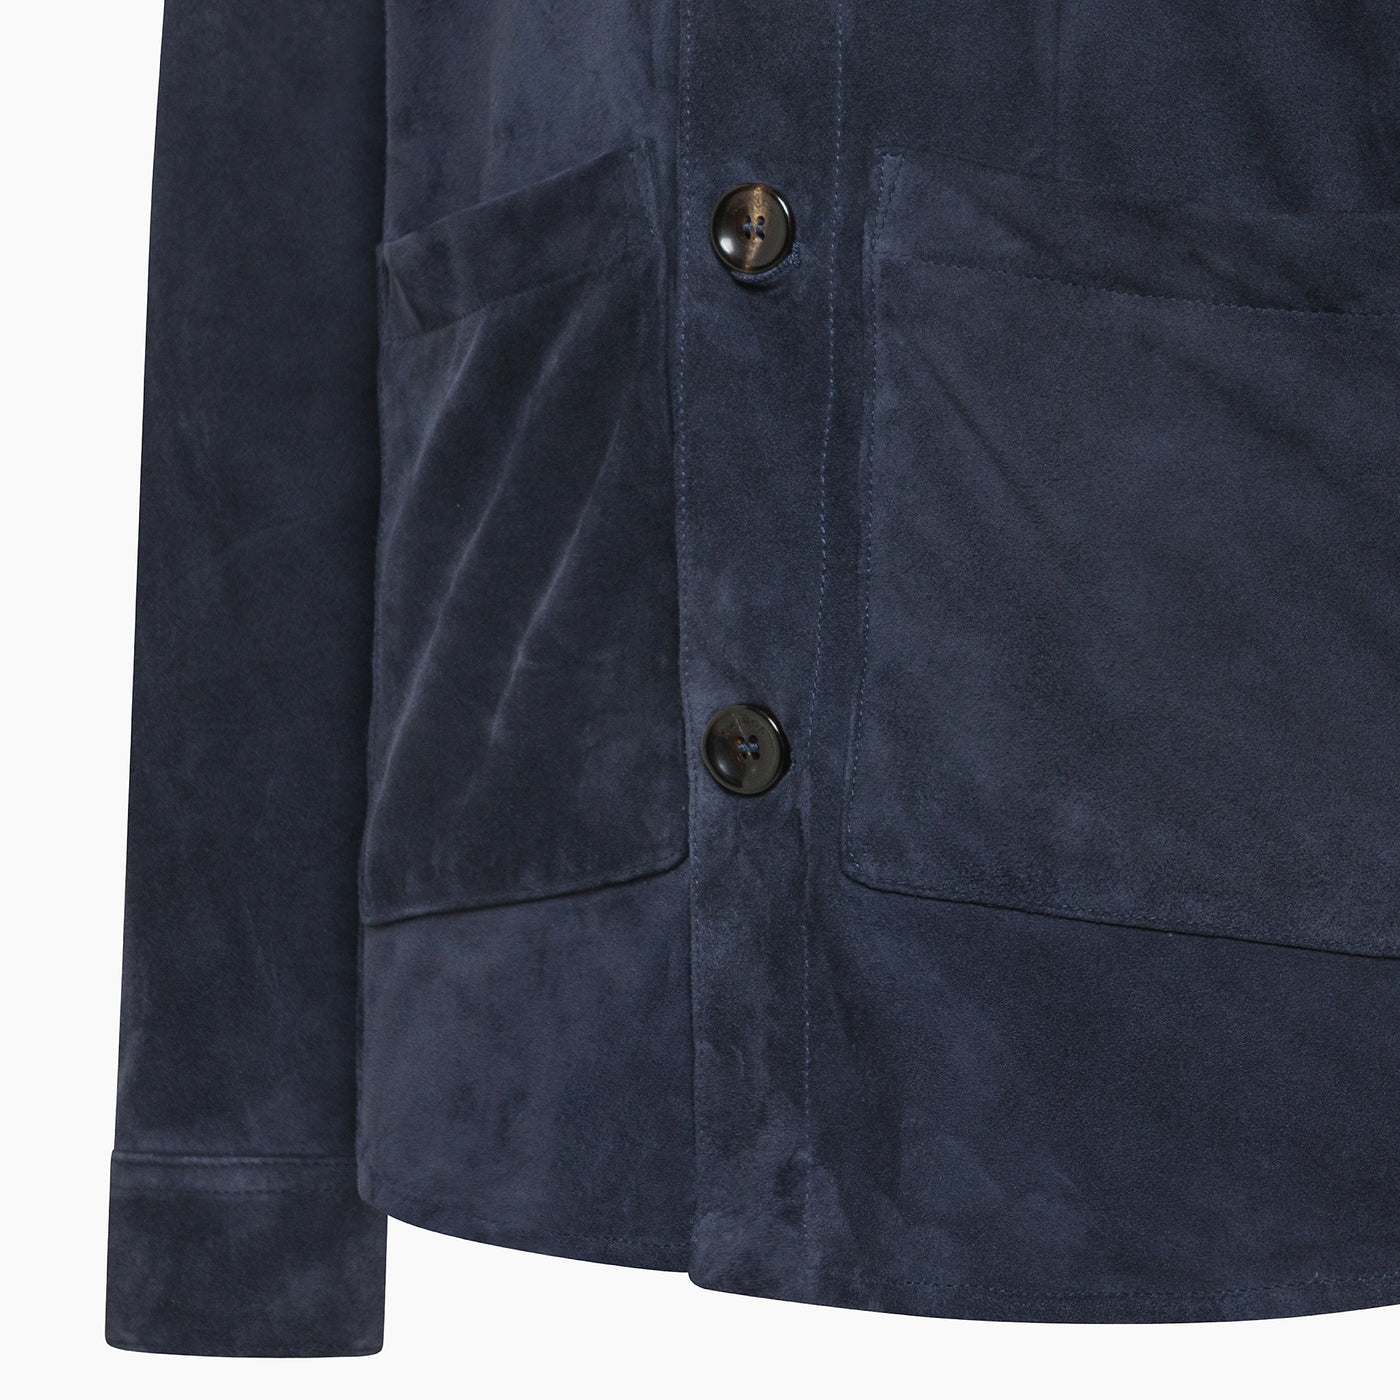 Amauri Shirt Jacket in Suede Leather